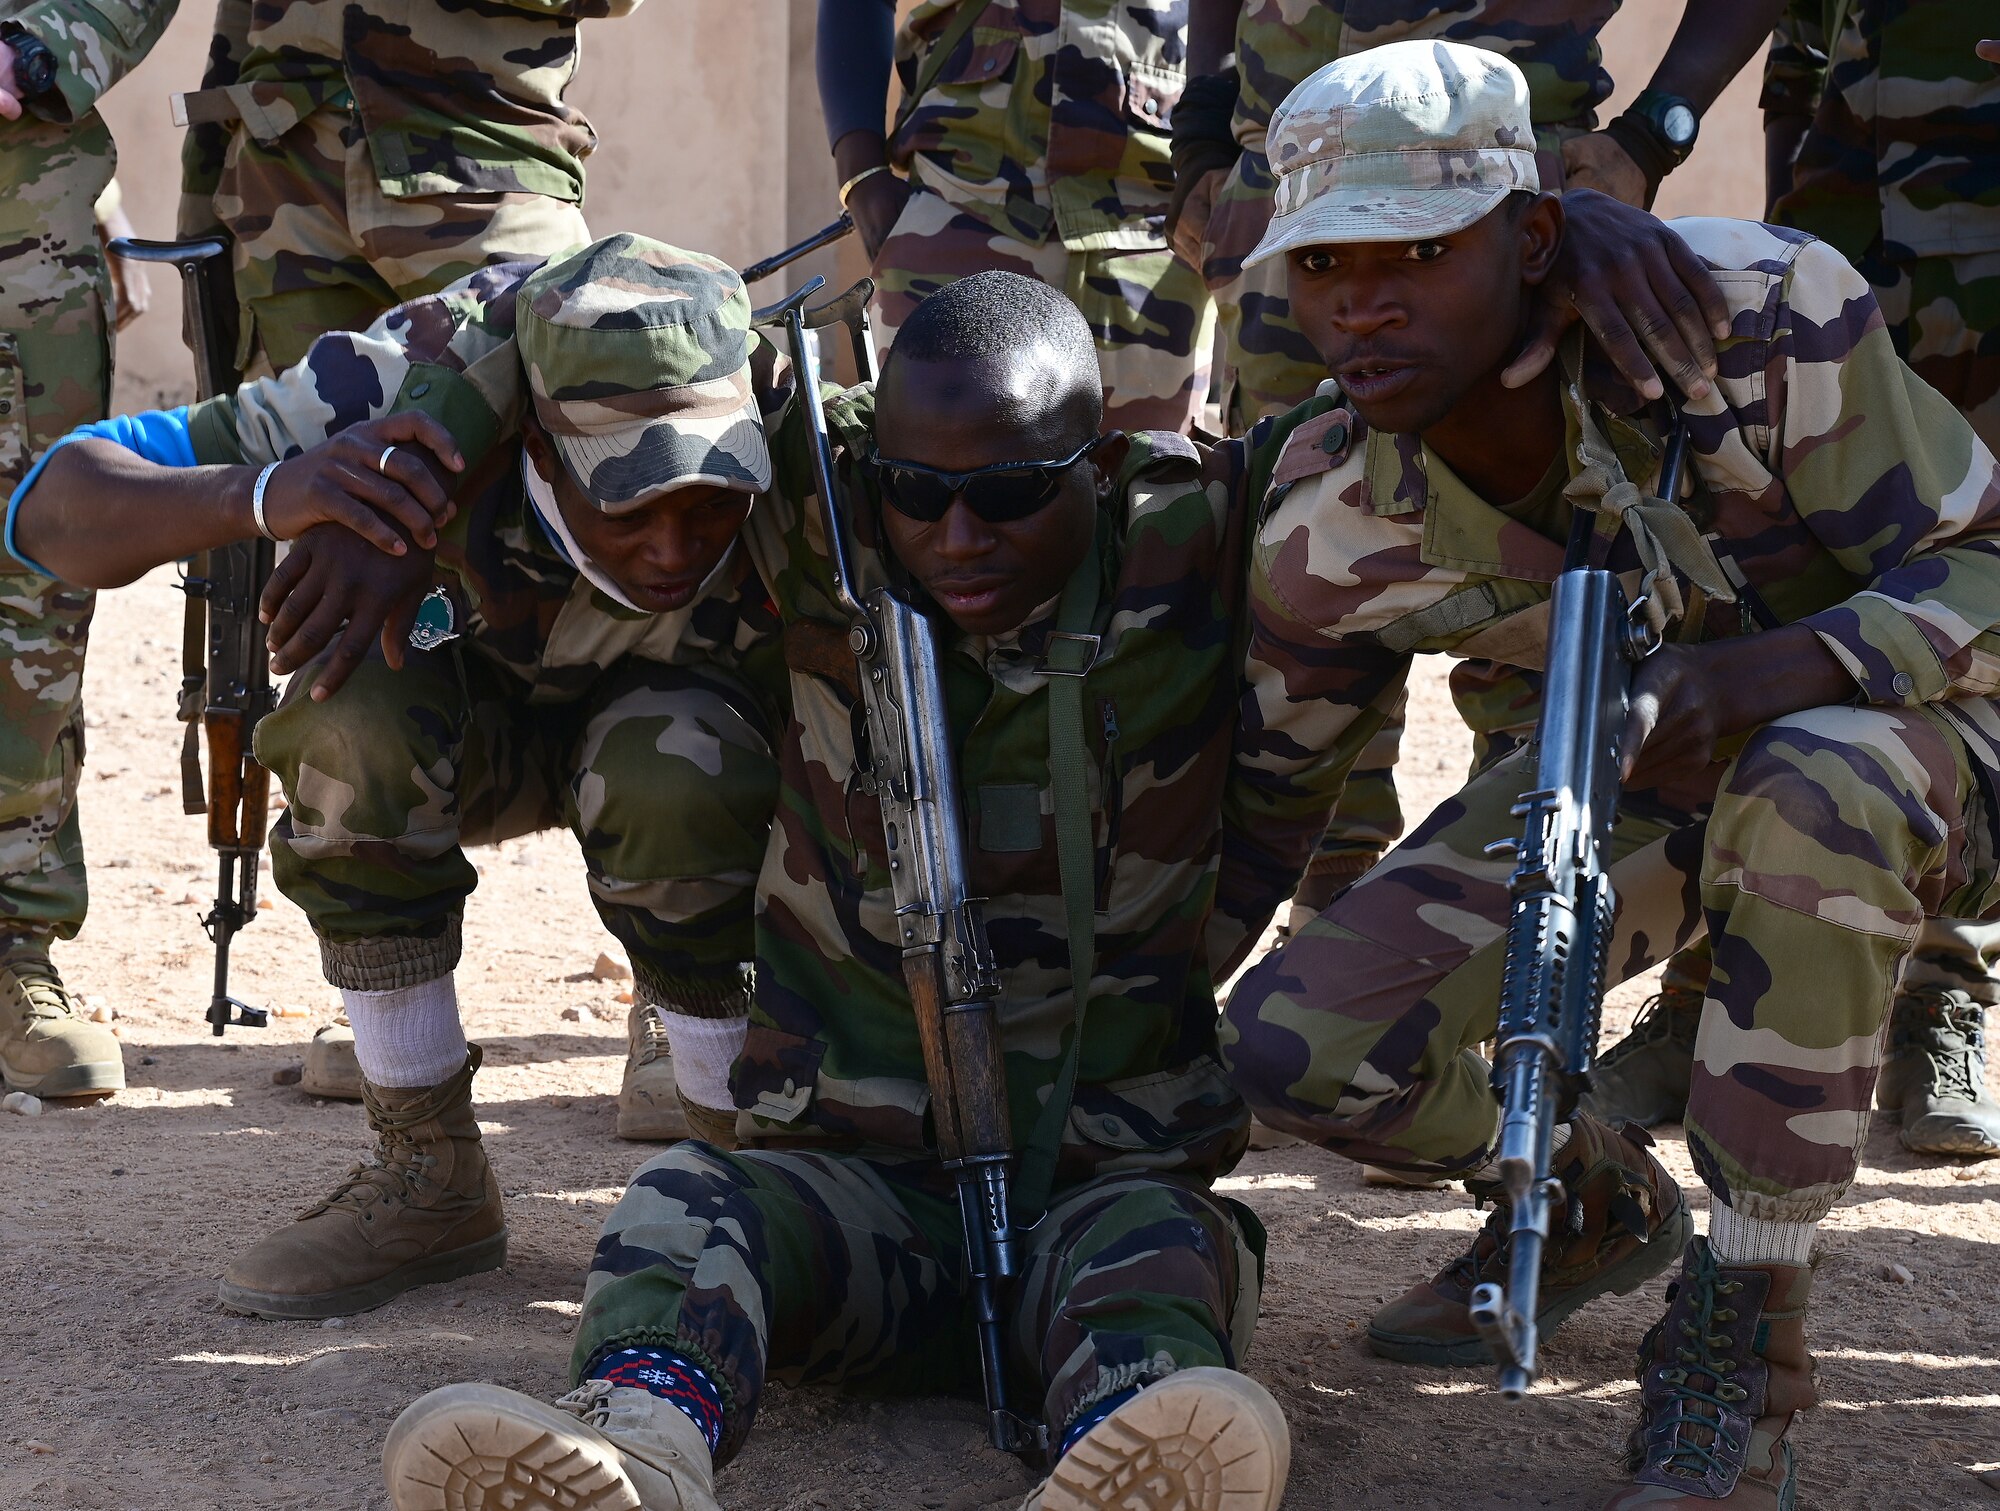 Three Nigerien Armed Forces (French language: Forces Armées Nigeriennes) members, practice a tactical carry taught to them by the 409th Expeditionary Security Forces Squadron air advisors and 724th Expeditionary Air Base Squadron firefighters  at Nigerien Air Base 201, Agadez, Niger, Jan. 21, 2022. The 409th ESFS hosted an eight-week course to train the FAN on various tactics such as combat lifesaving skills, weapon maneuvers, vehicle searches and patrol movements to counter the escalating violent extremism in the tri-border region of Niger, Burkina Faso, and Mali. (U.S. Air Force photo by Tech. Sgt. Stephanie Longoria)